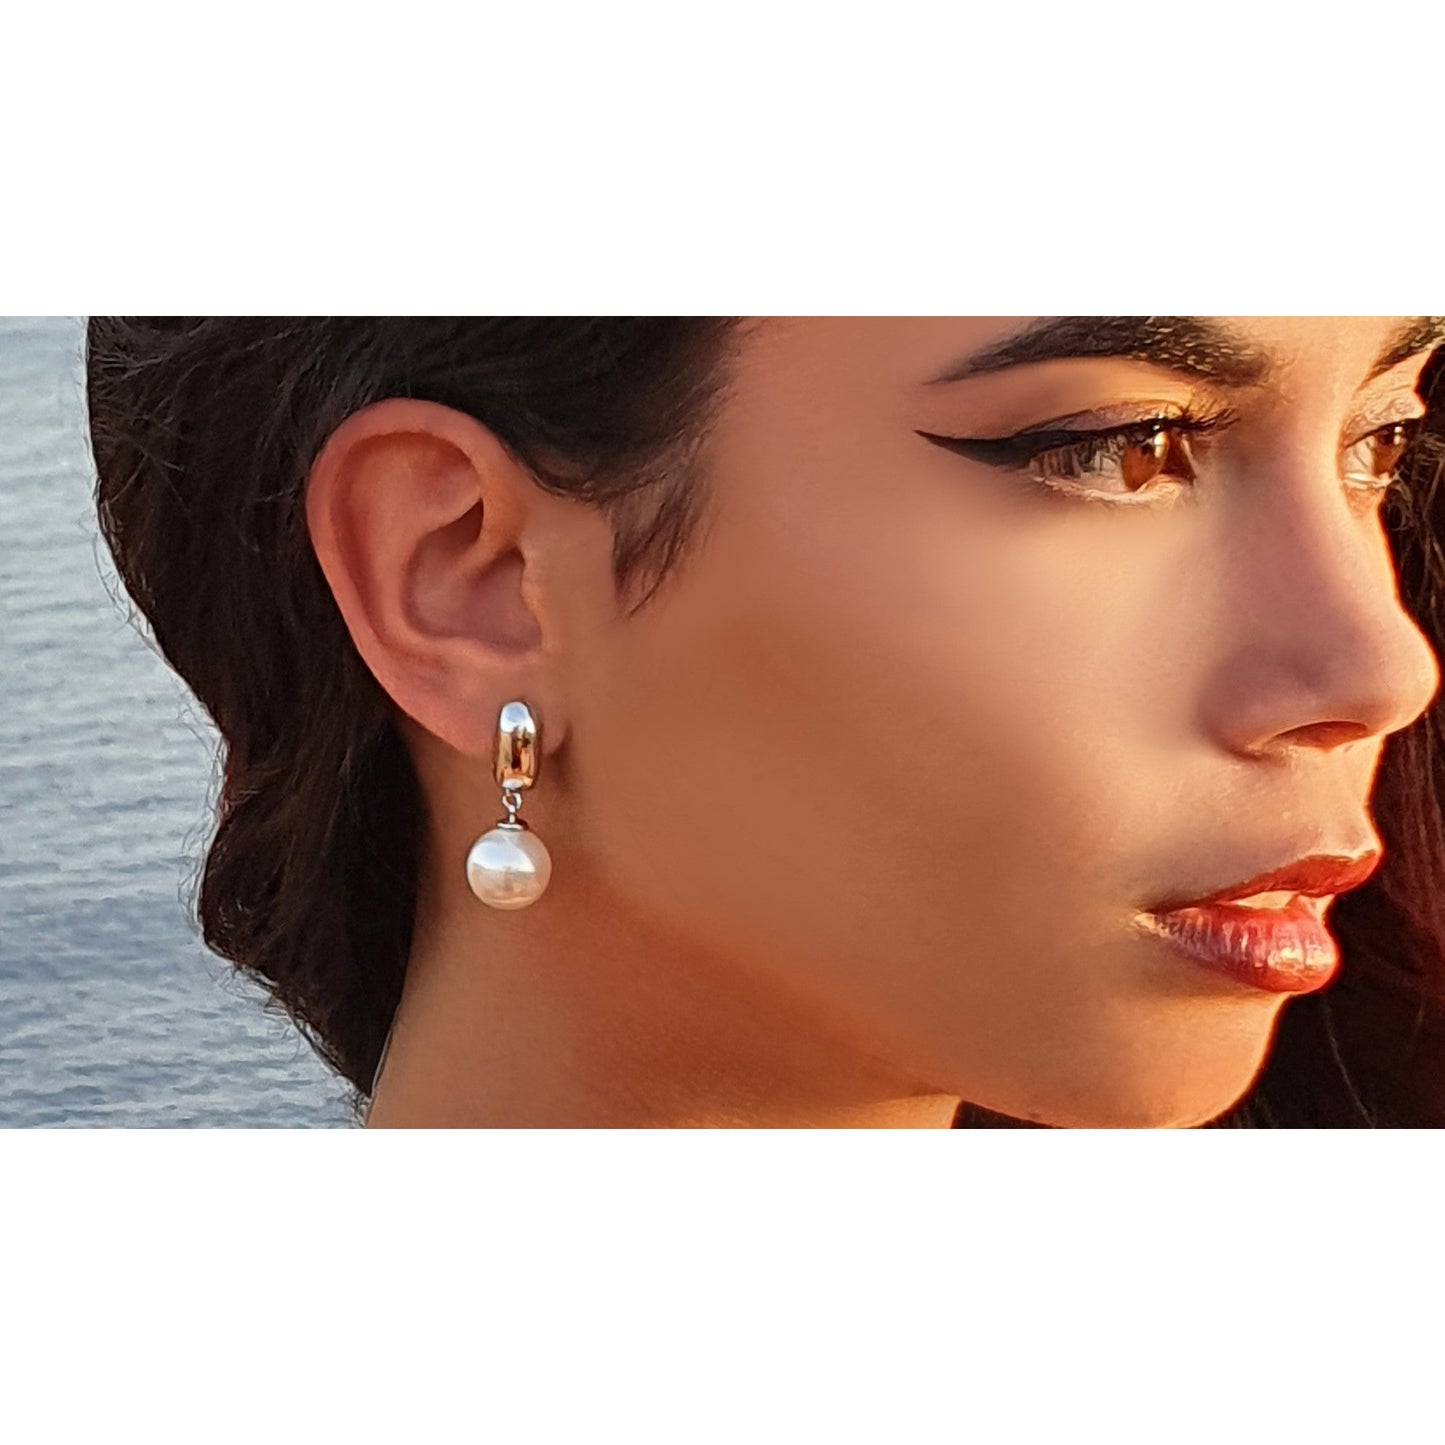 Mallorca Style Pearl Earrings Creolen by Nelissima